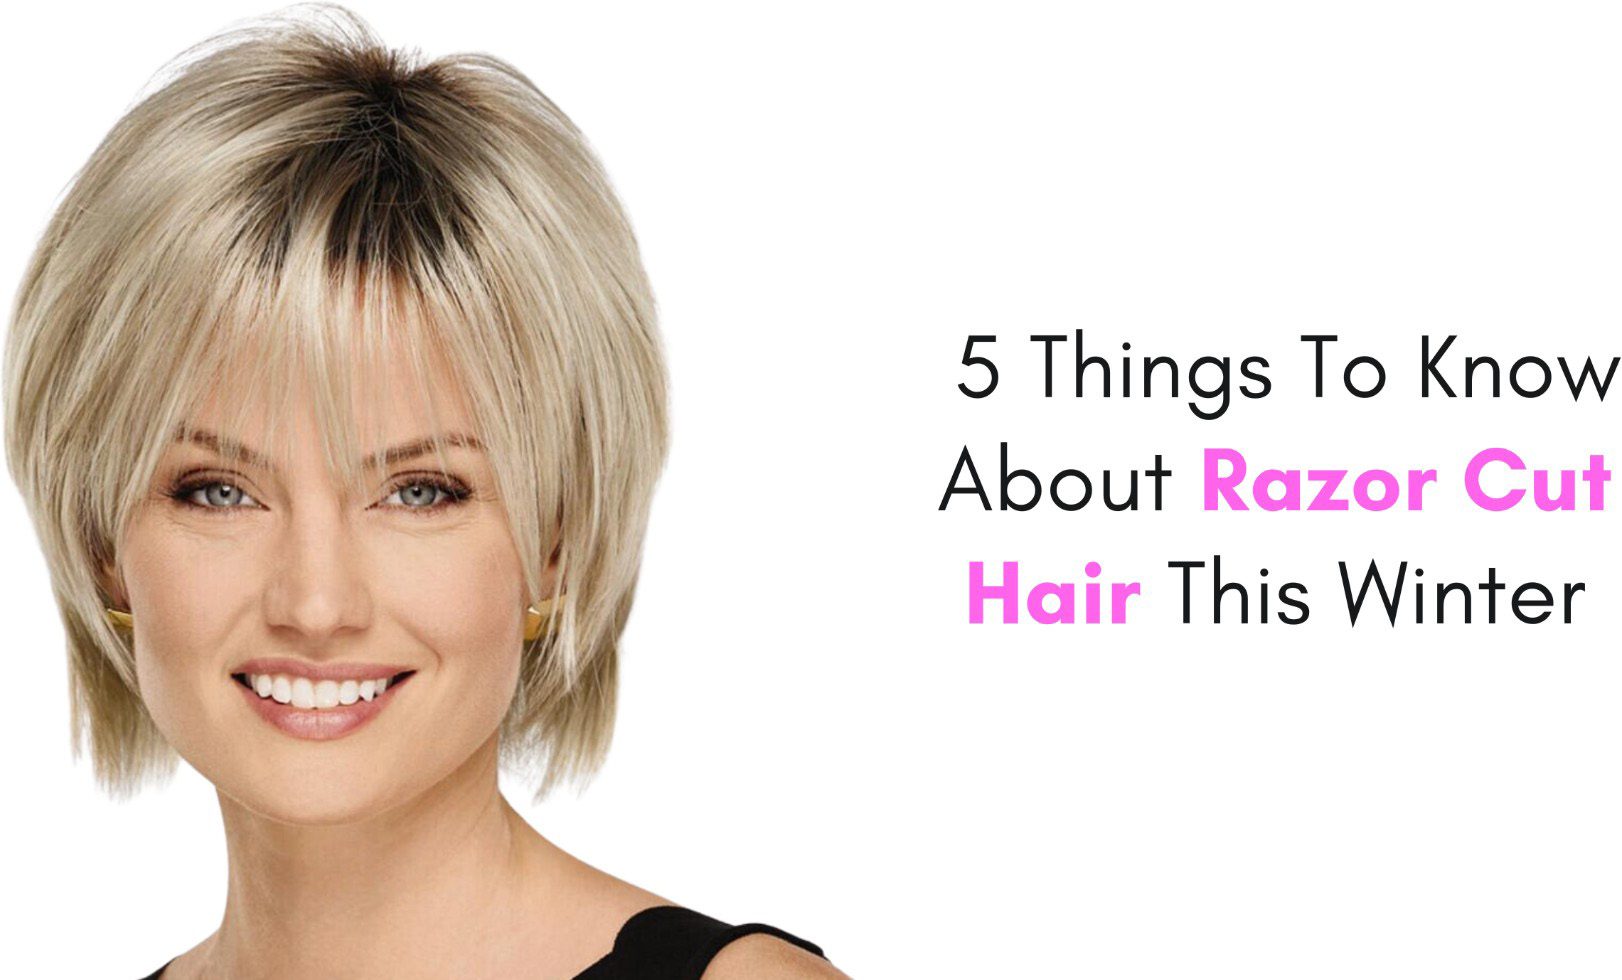 5 Things To Know About Razor Cut Hair This Winter